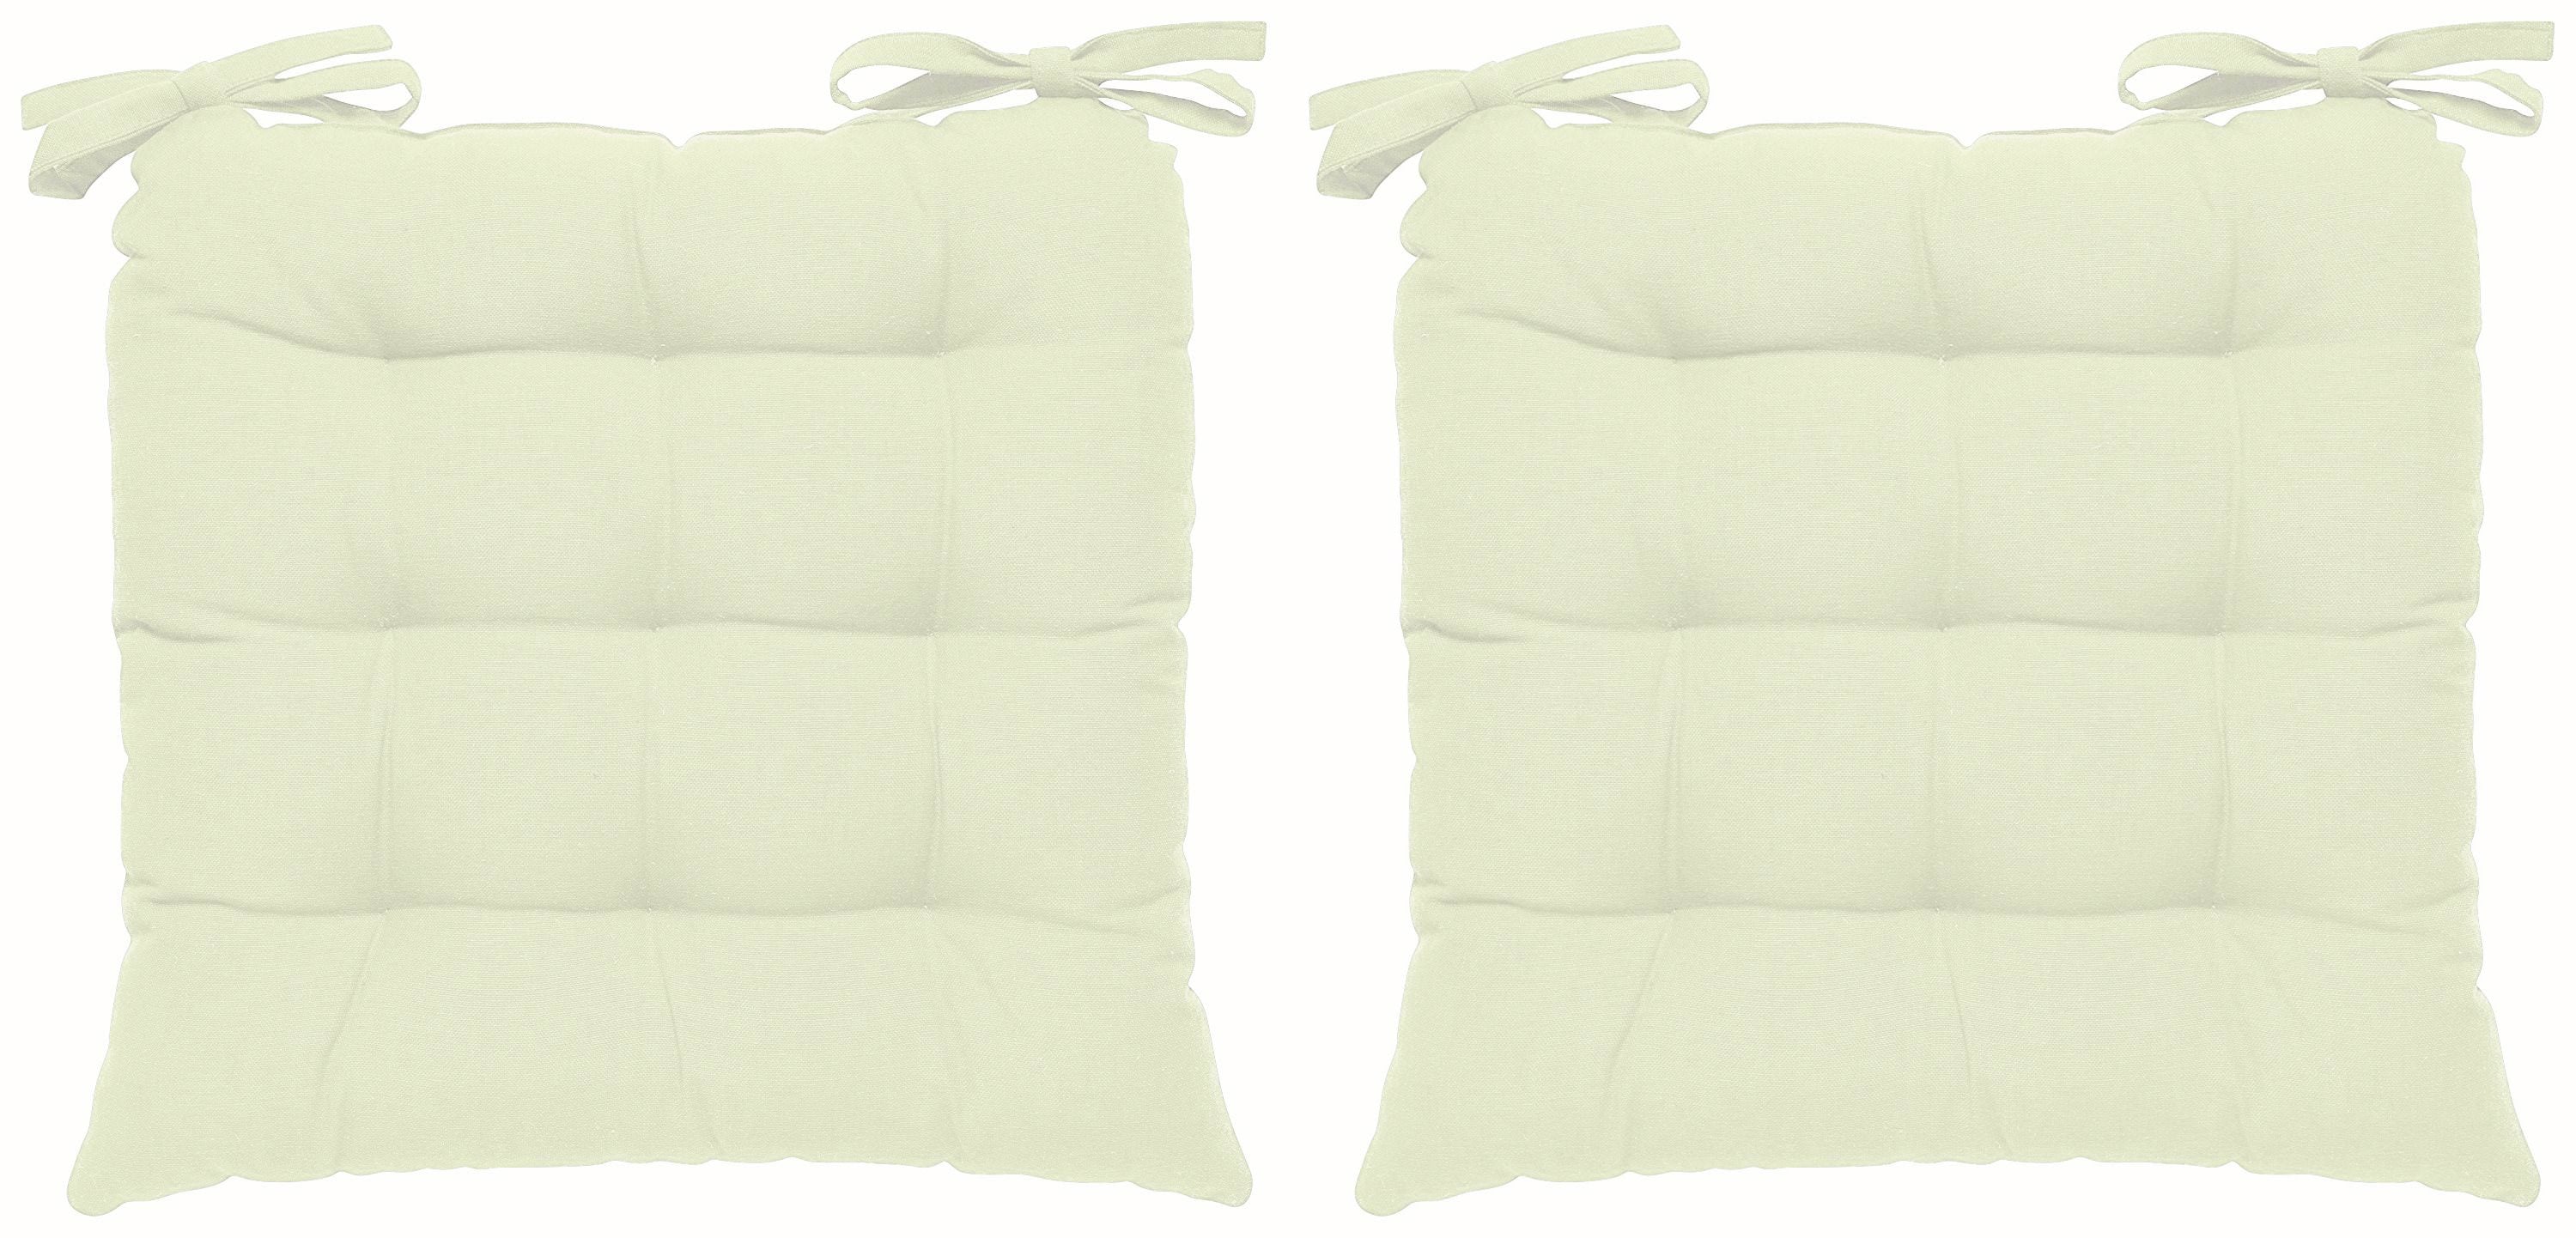 Encasa Homes Chairpad 40x40cm (2pc pack) - Dyed Cotton Canvas Filled Cushion - Natural